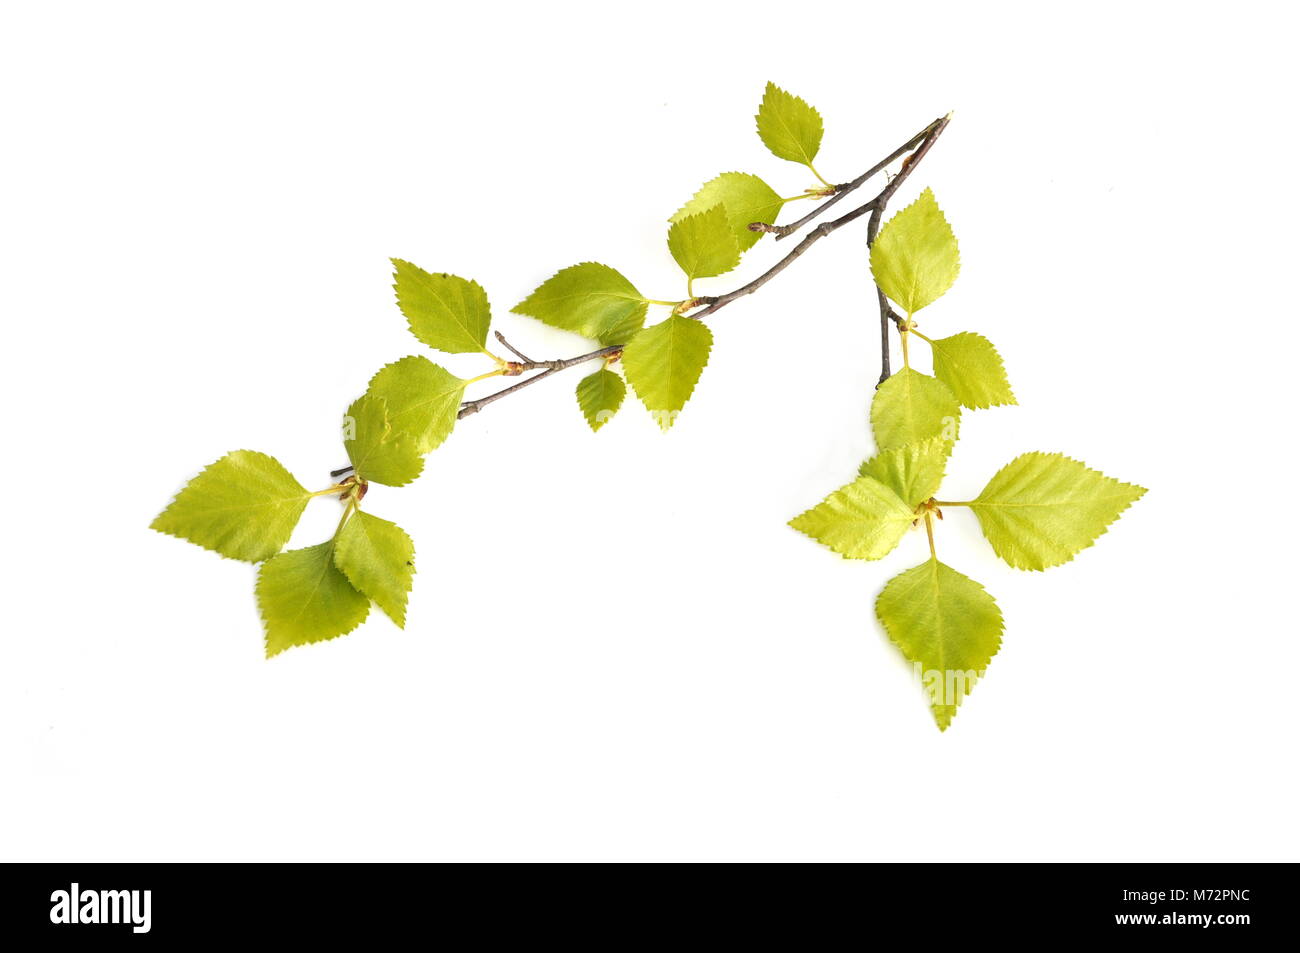 Branches with new intensely green birch leaves on white background Stock Photo